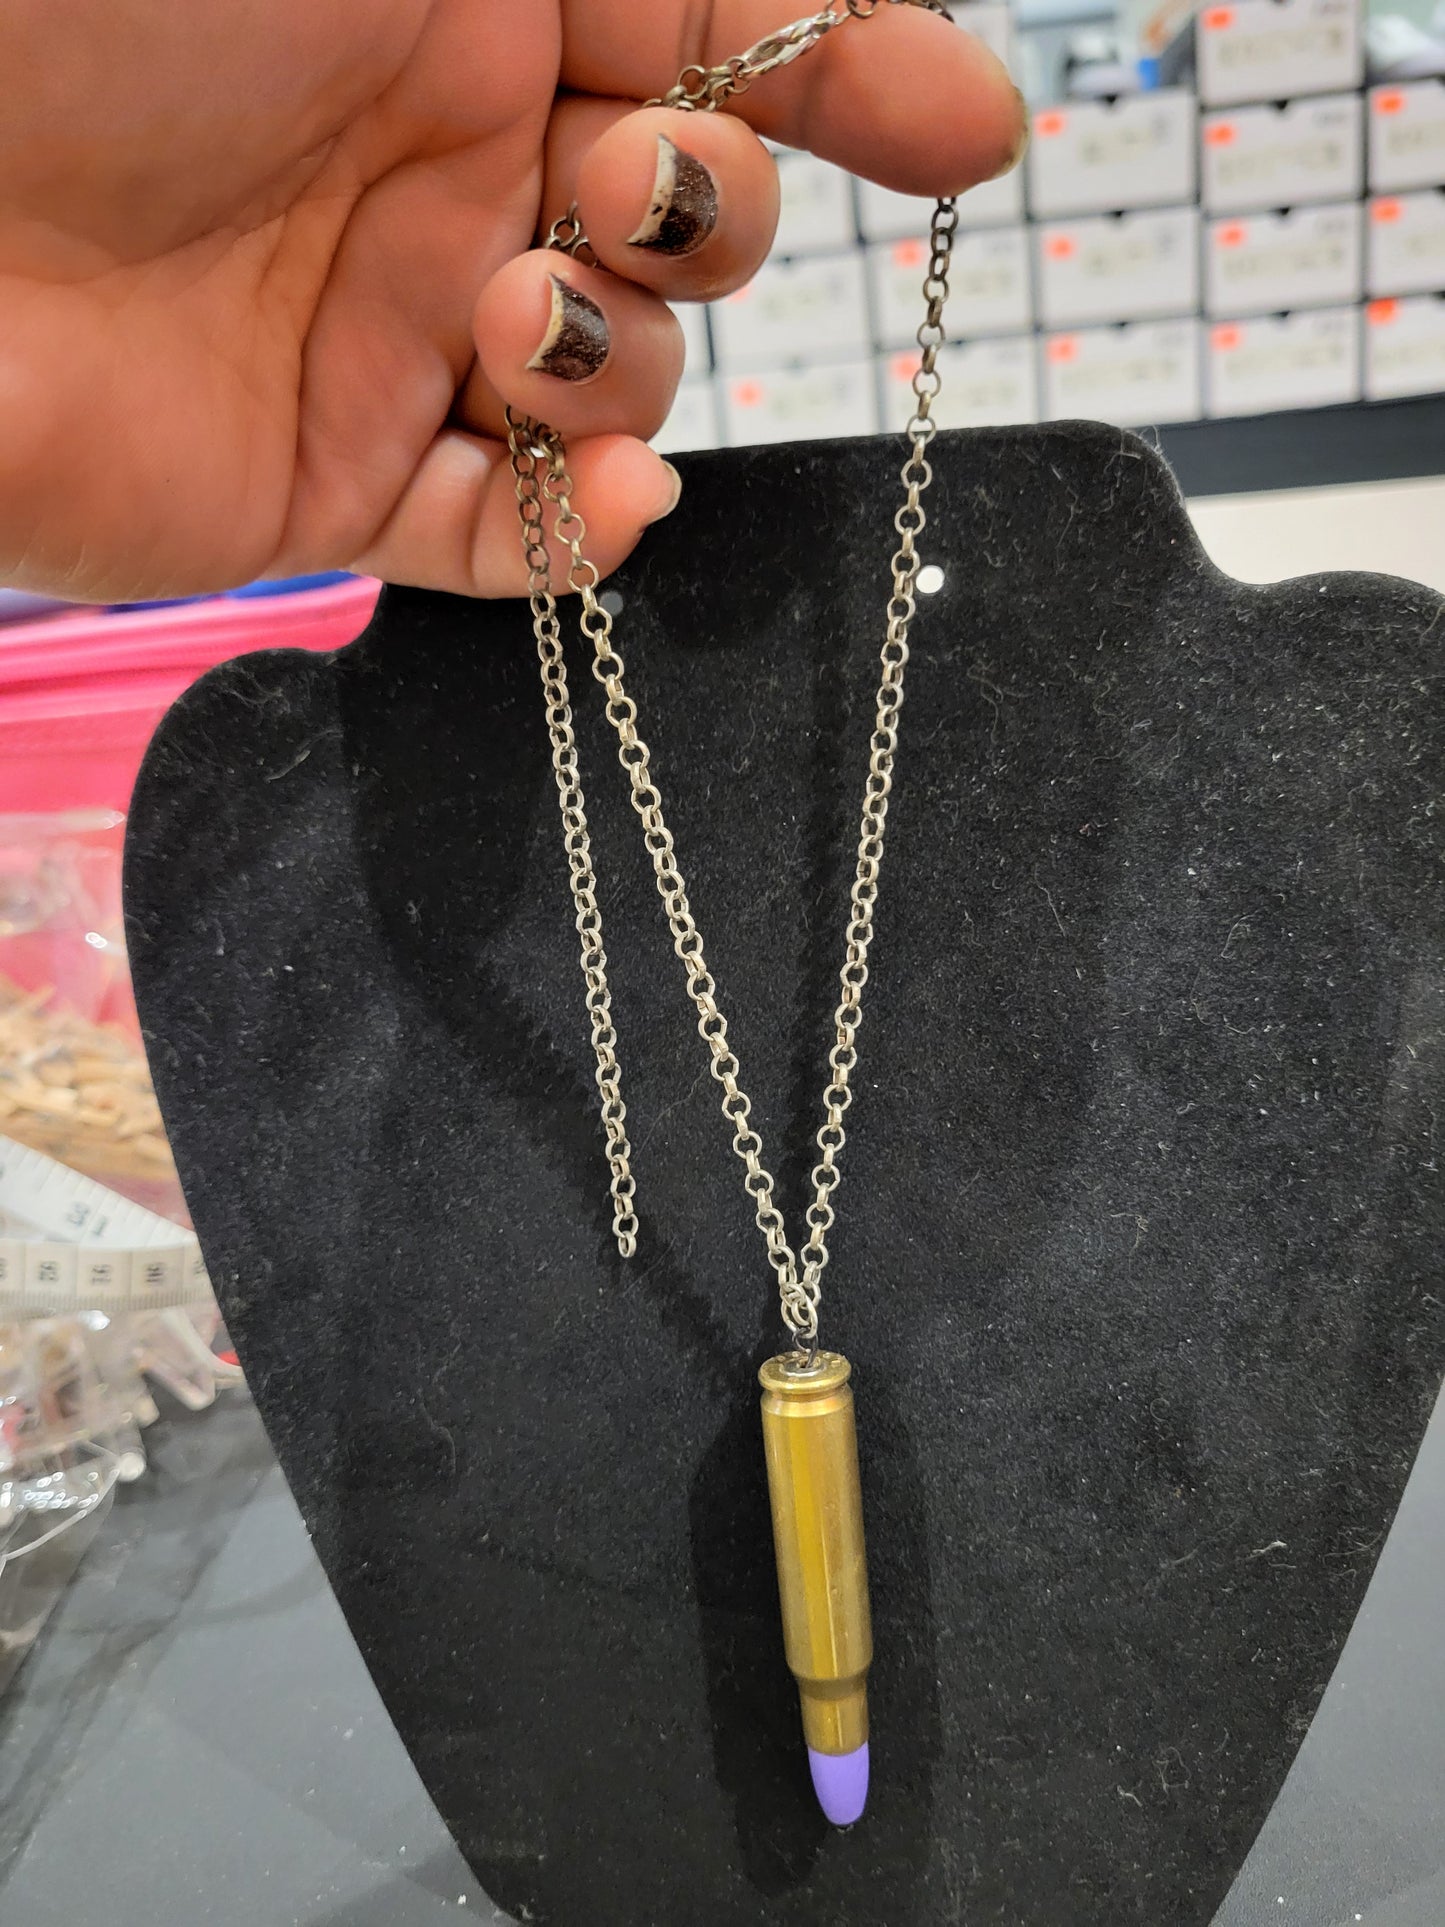 Handmade bullet casing necklace with purple wooden bead